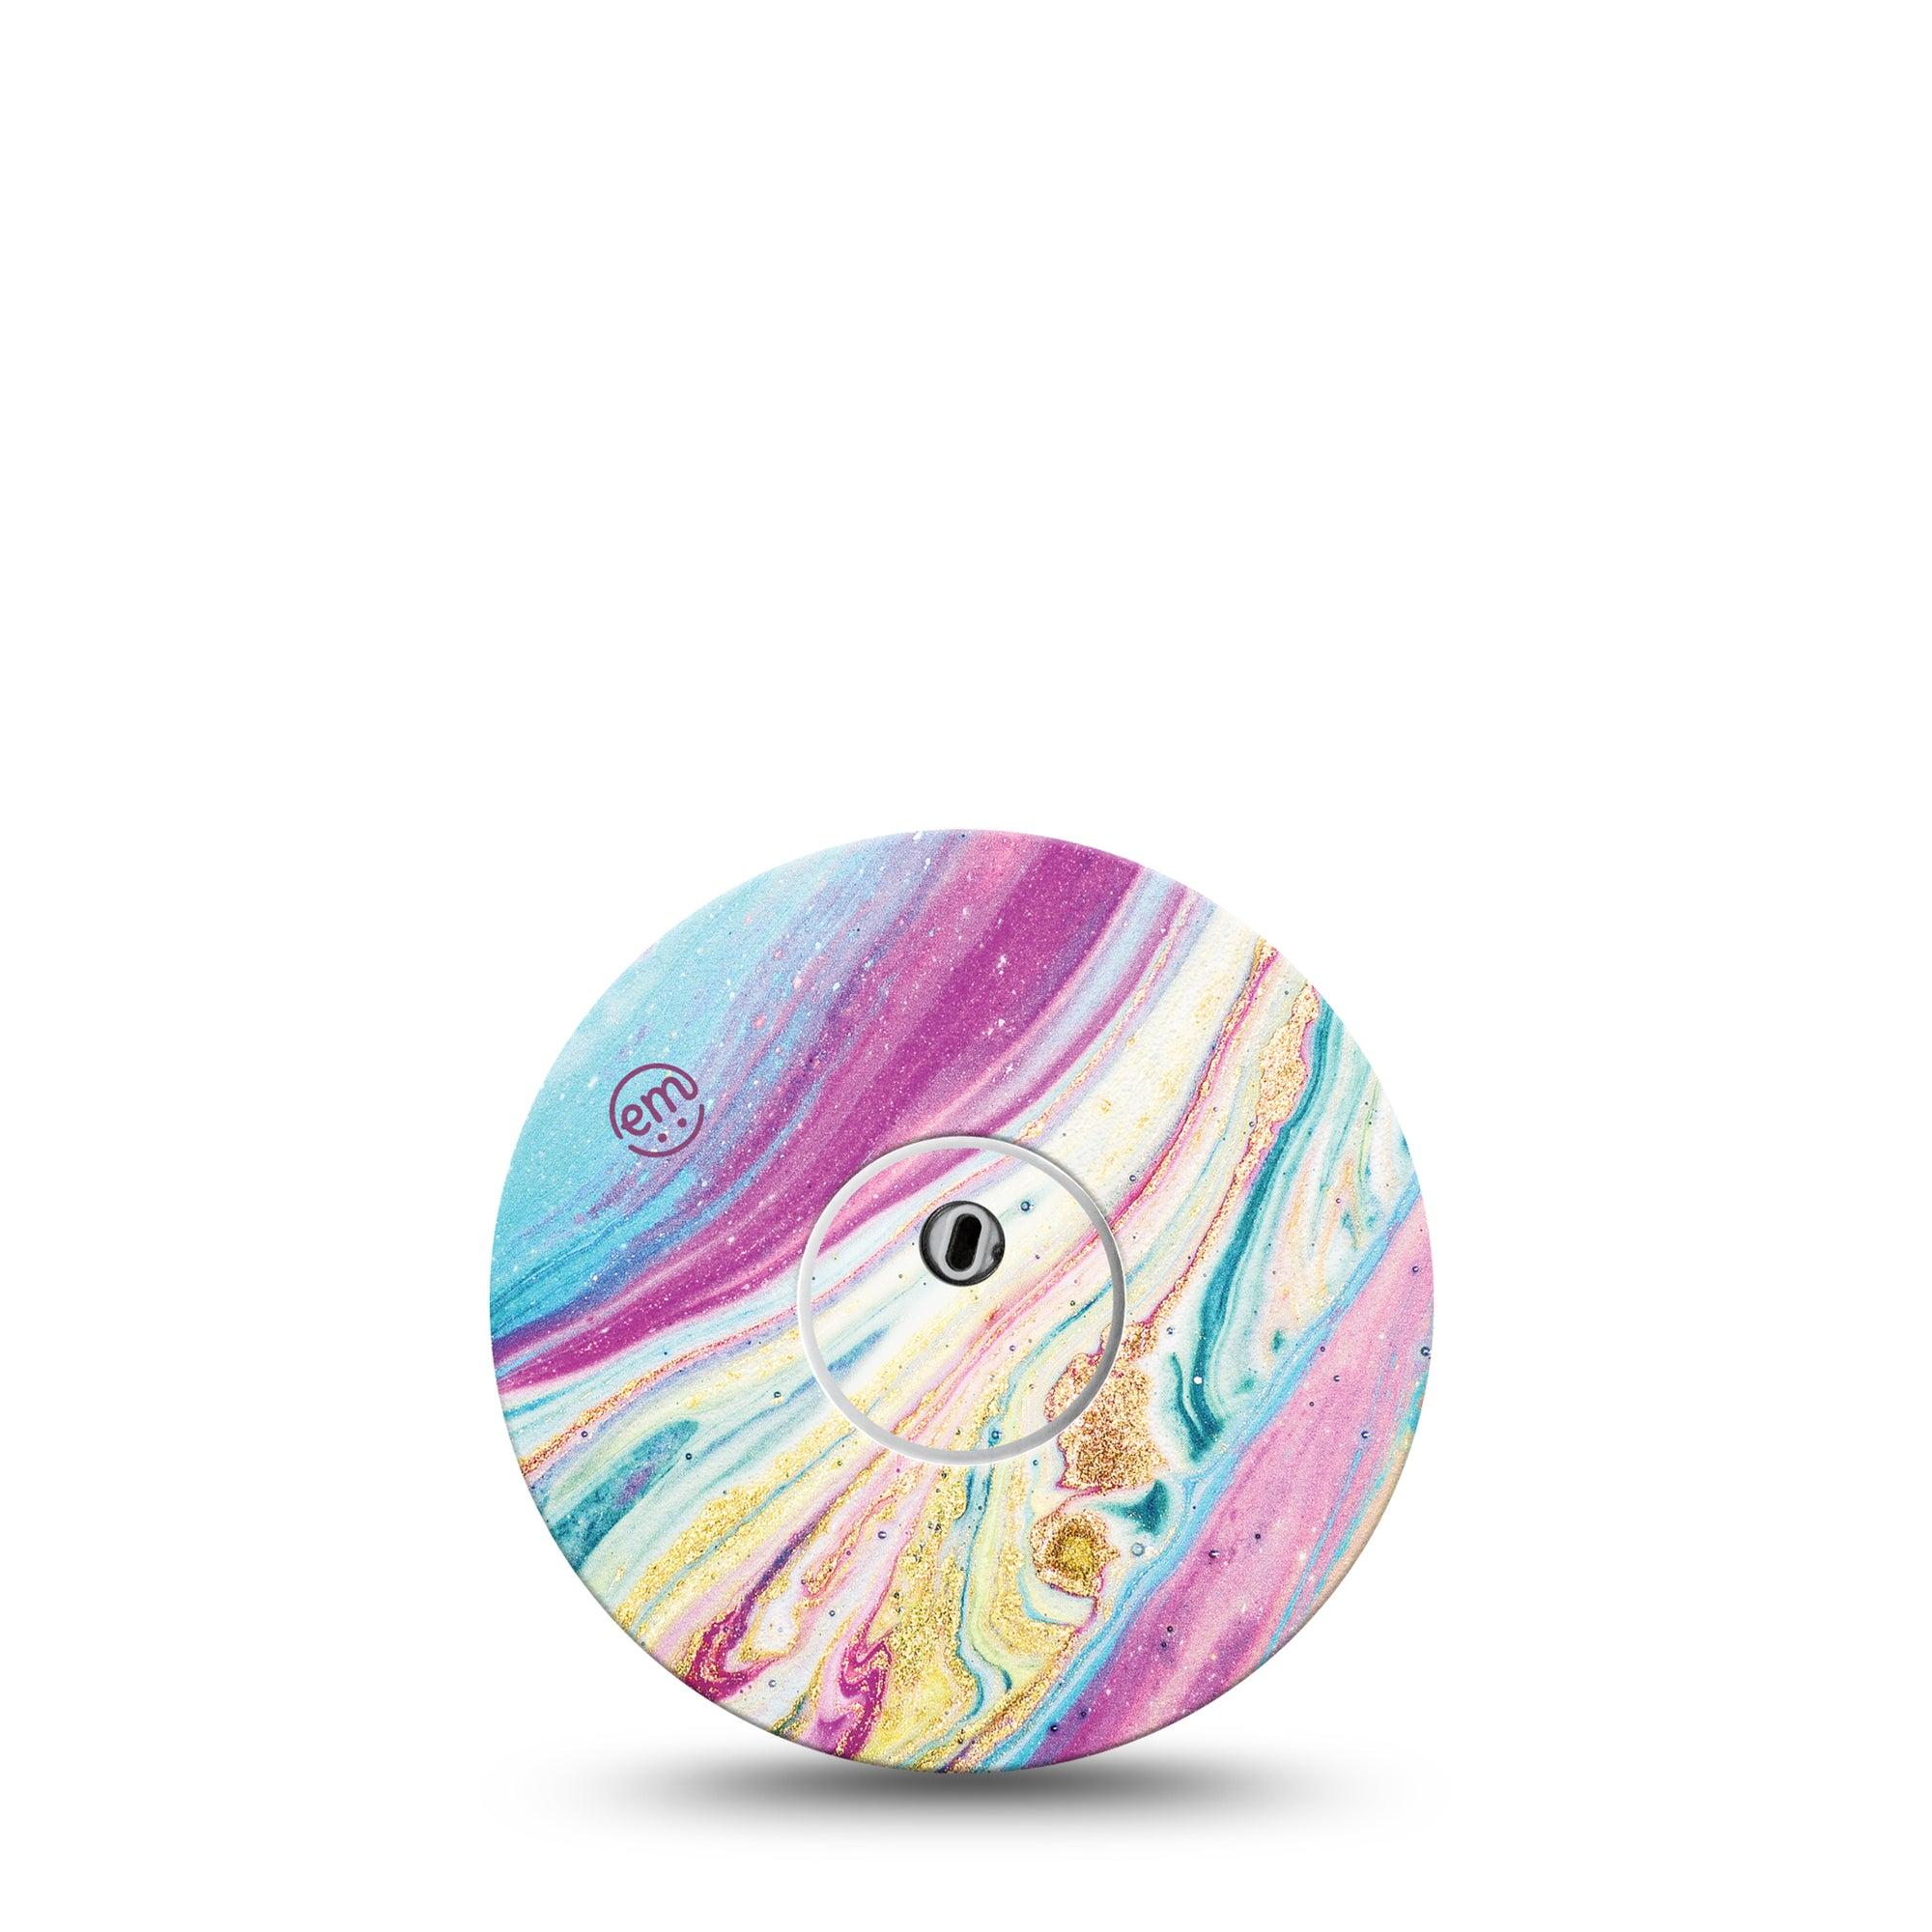 ExpressionMed Libre 3 Transmitter Sticker Glittery and Winding Colors Themed Design, Tape and Sticker